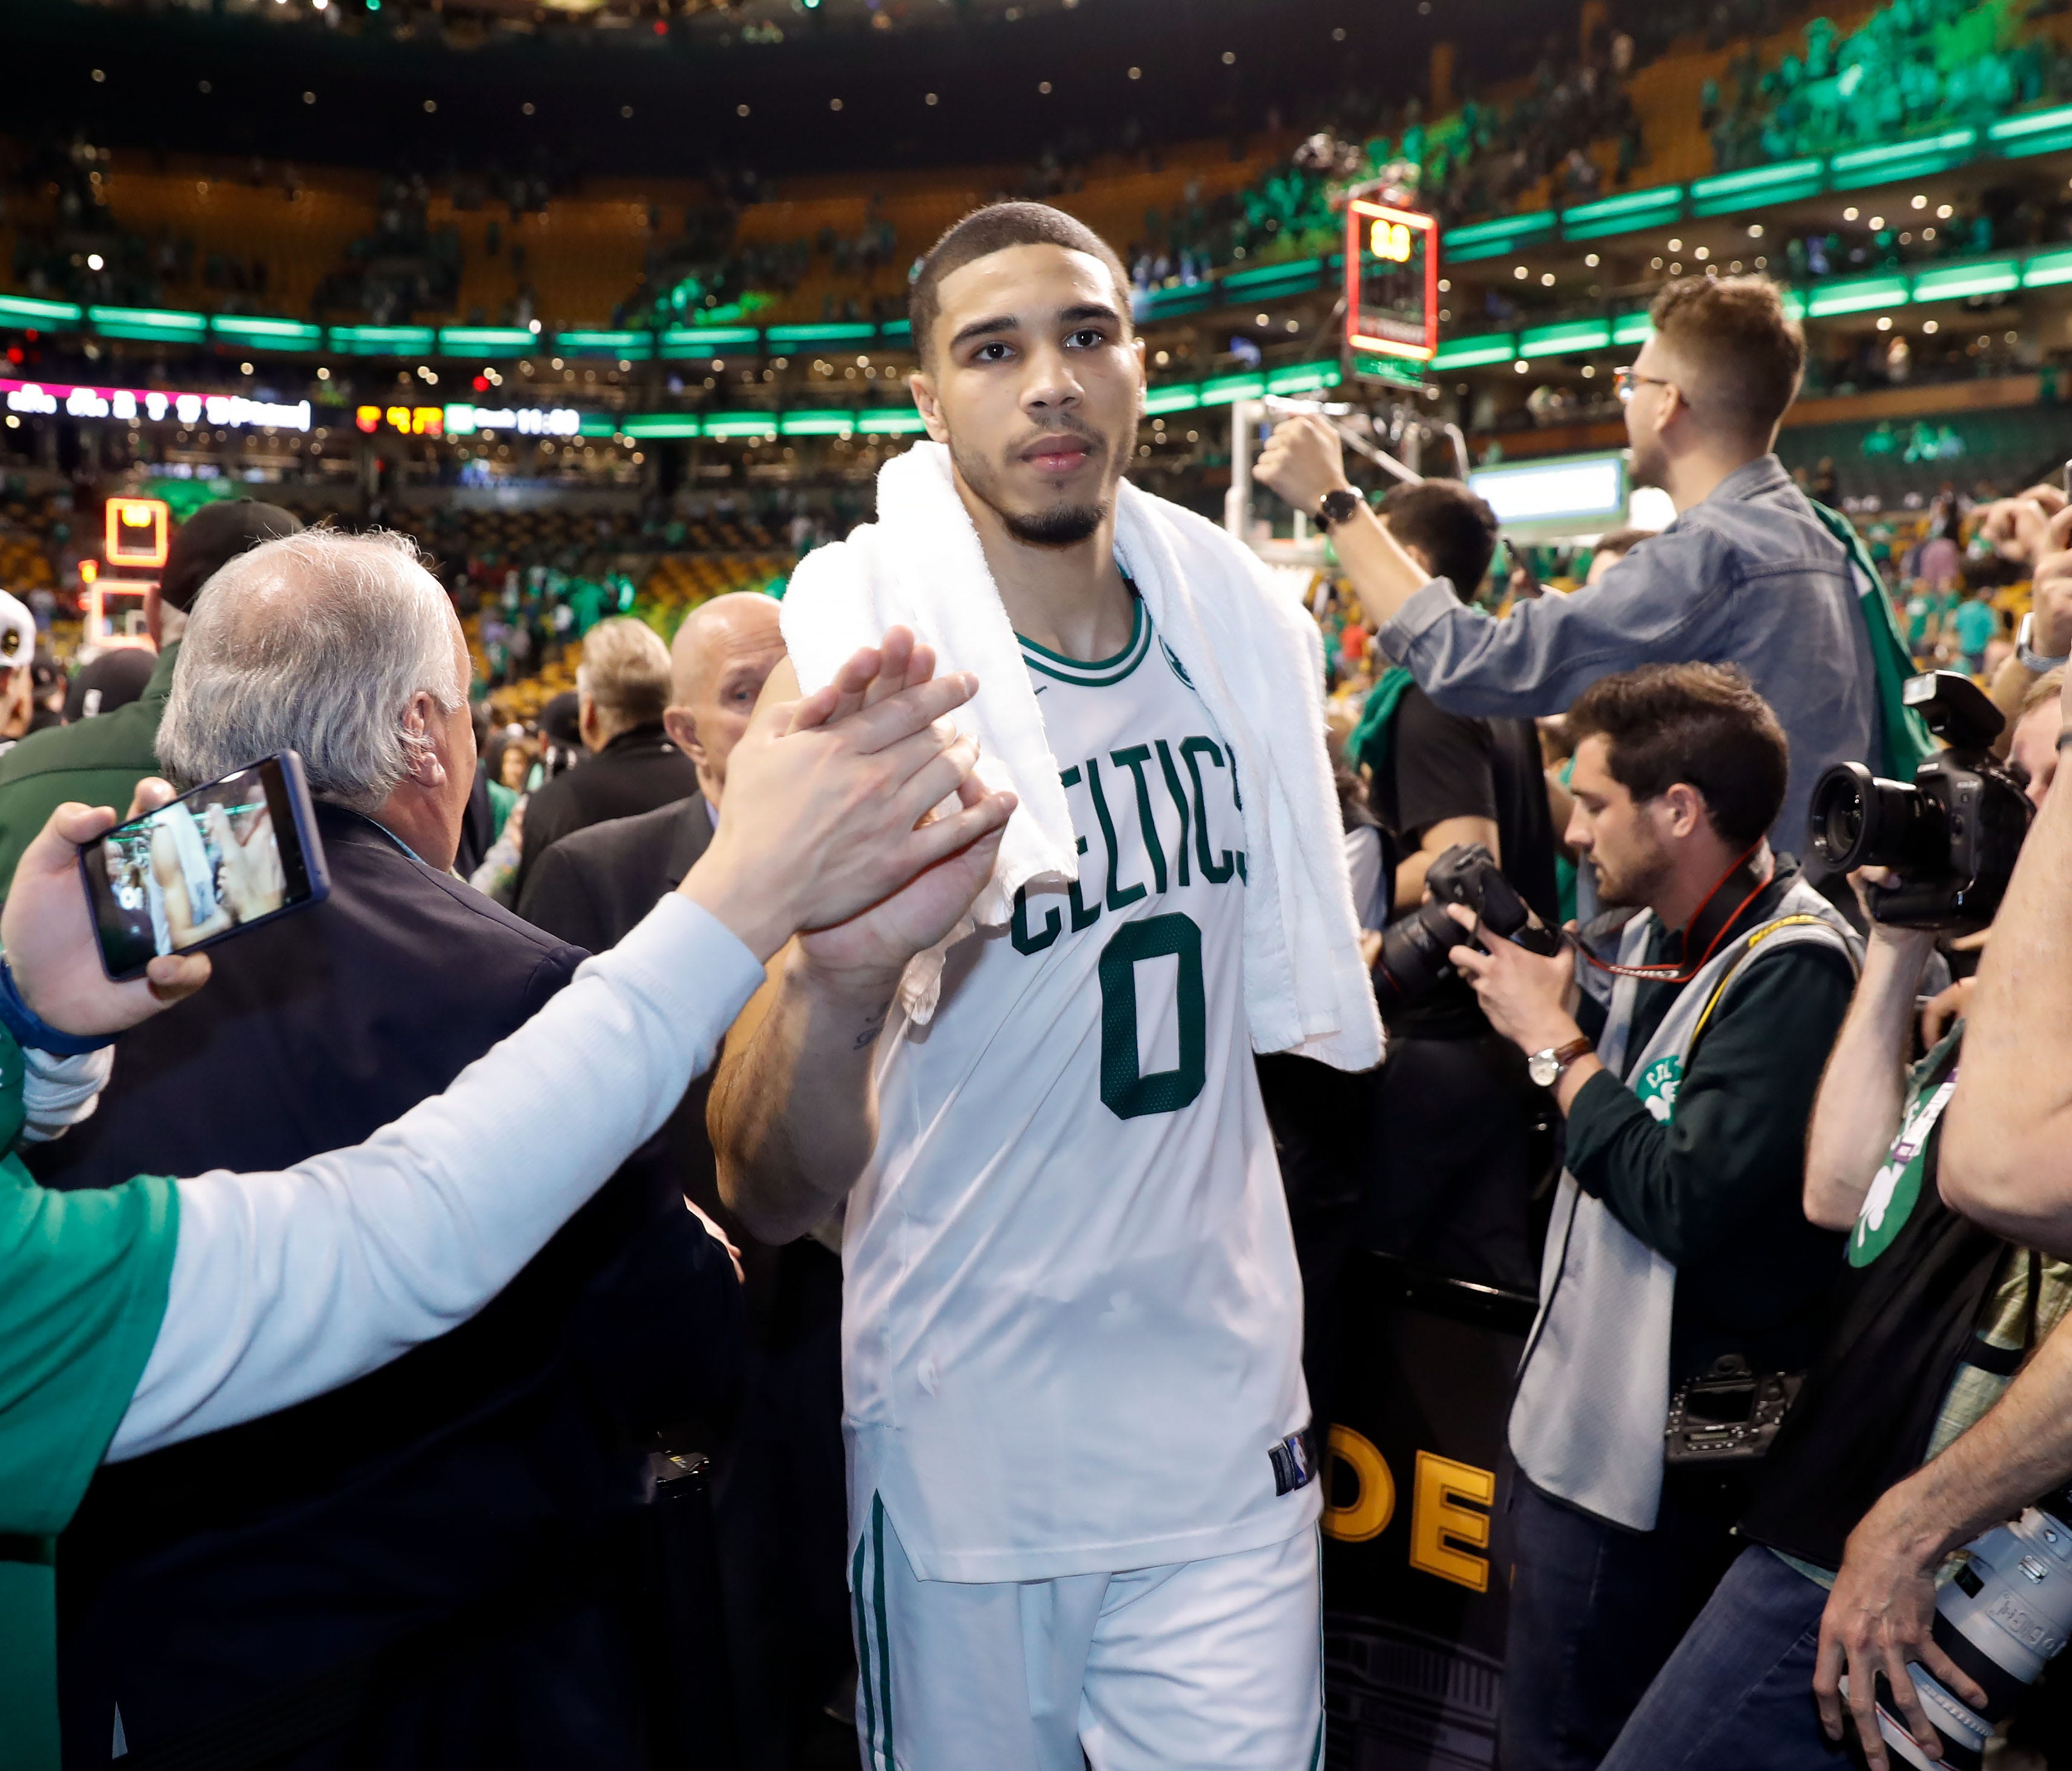 Boston Celtics forward Jayson Tatum (0) high-fives fans as he walks off of the court after defeating the Cleveland Cavaliers in game five of the Eastern conference finals of the 2018 NBA Playoffs at TD Garden.